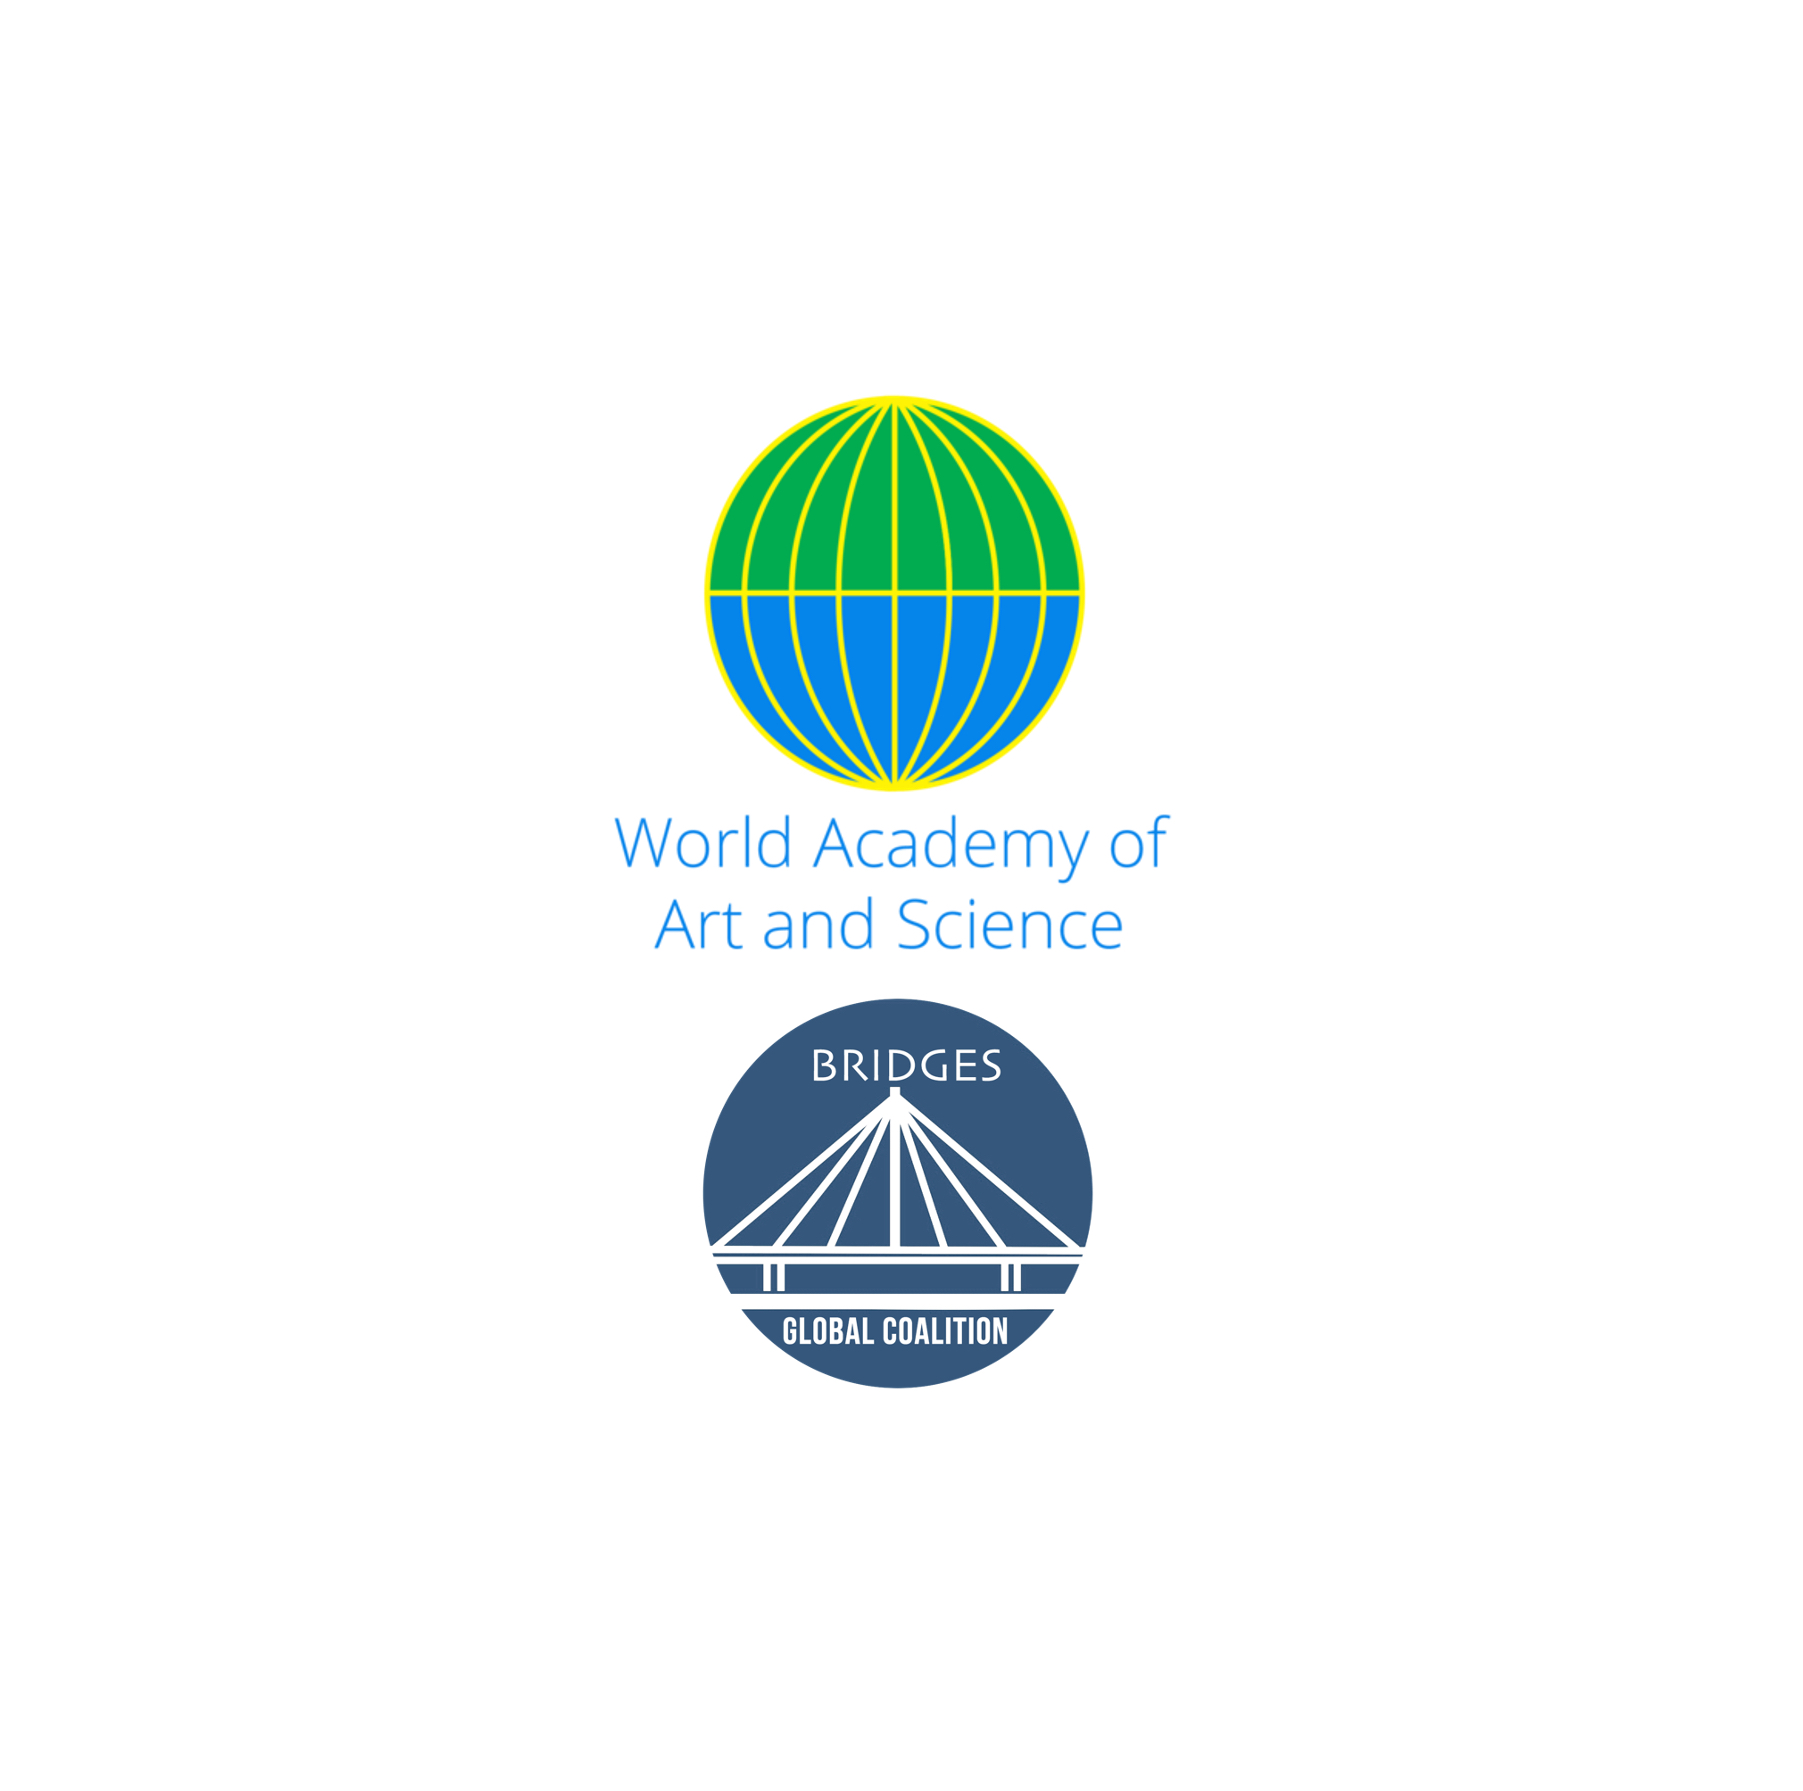 BRIDGES to partner with World Academy of Art and Science on Education for Human Security Conference (7-9 March 2023)